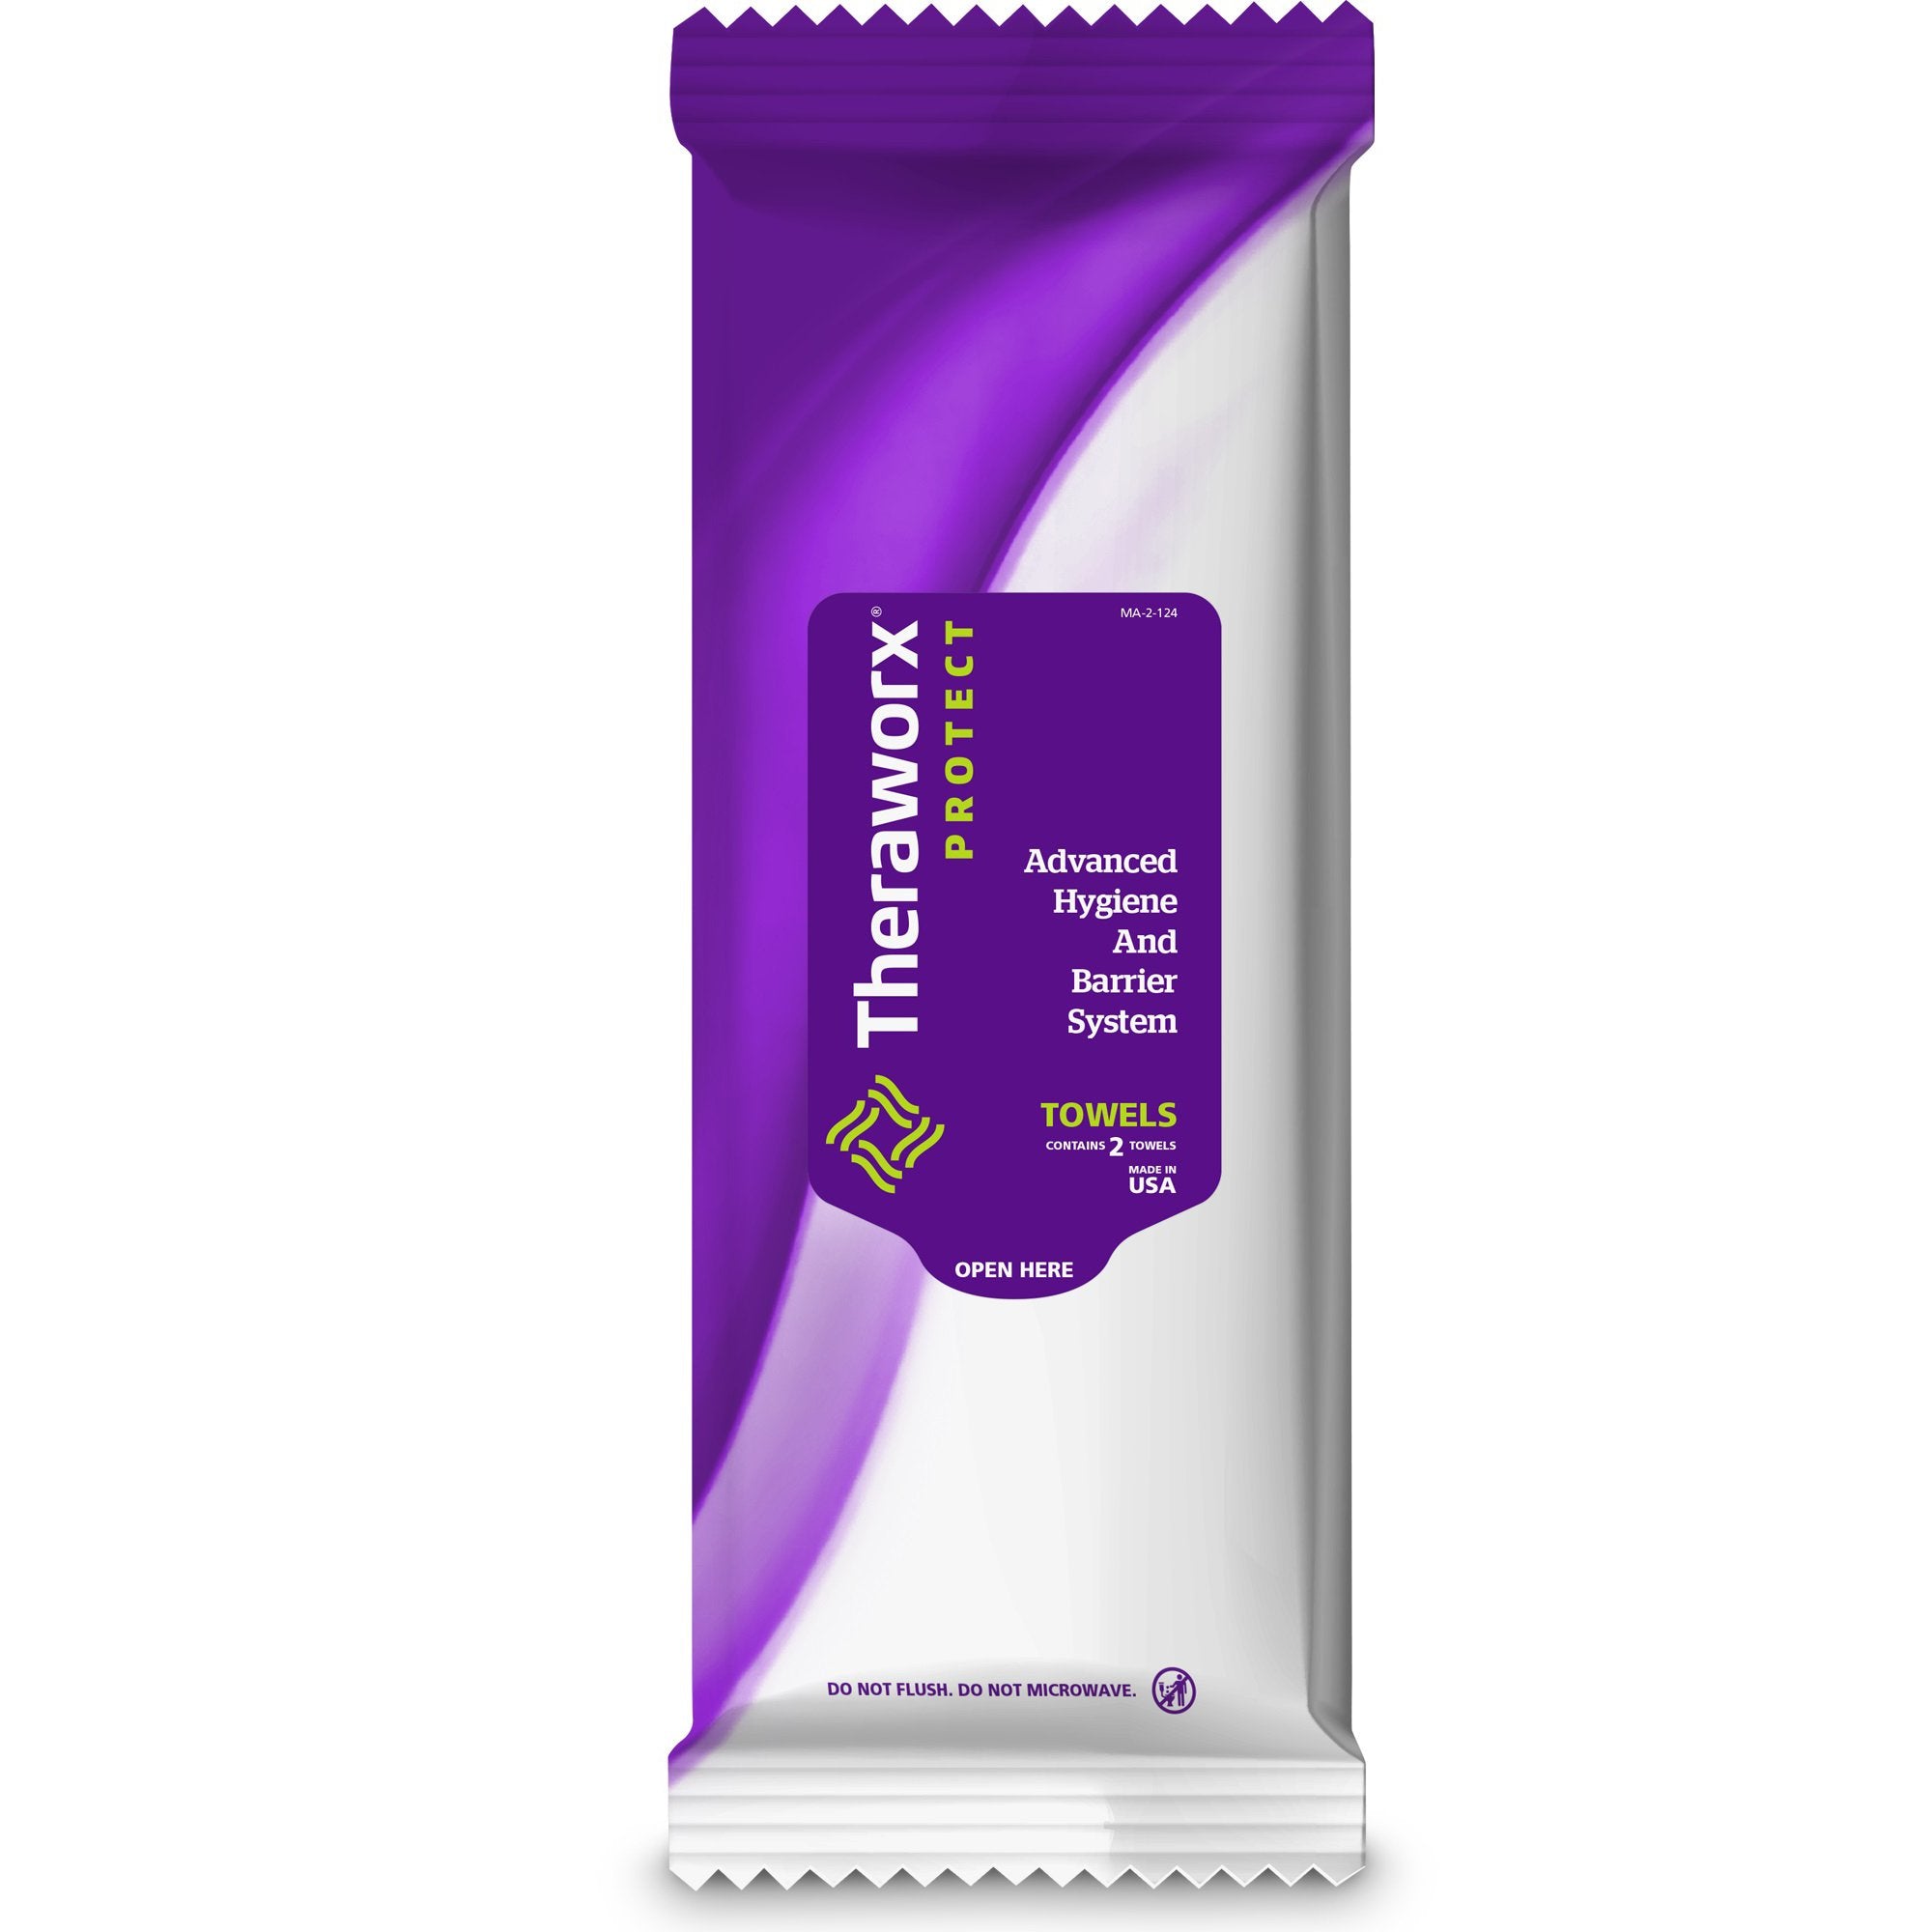 Personal Hygiene Barrier Wipe Theraworx® Protect Advanced Hygiene Barrier System Soft Pack Lavender Scent 2 Count